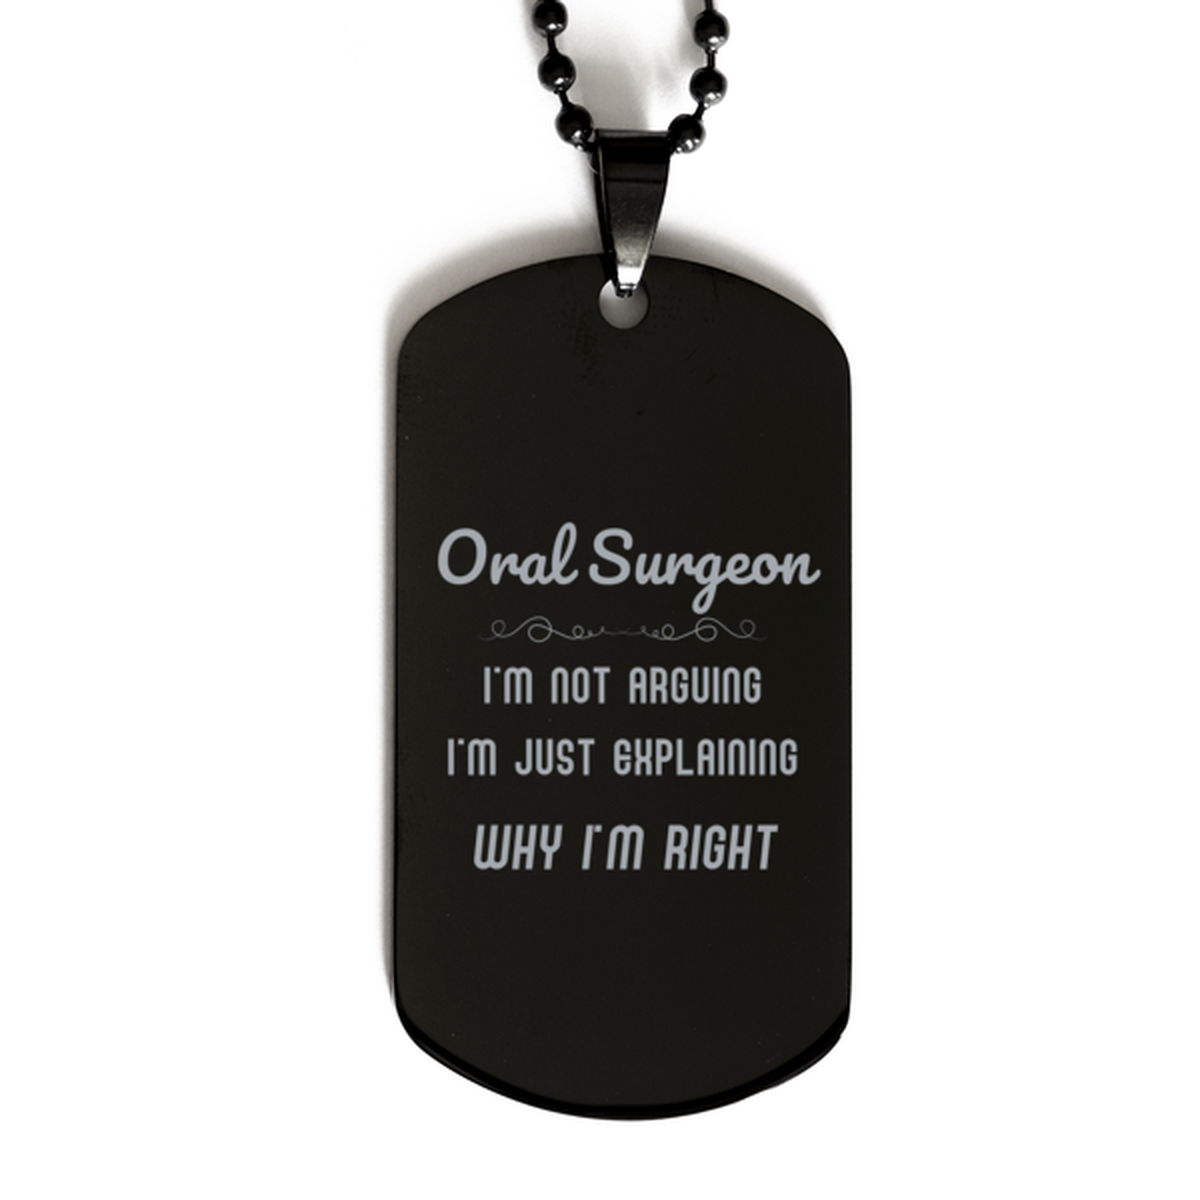 Oral Surgeon I'm not Arguing. I'm Just Explaining Why I'm RIGHT Black Dog Tag, Funny Saying Quote Oral Surgeon Gifts For Oral Surgeon Graduation Birthday Christmas Gifts for Men Women Coworker